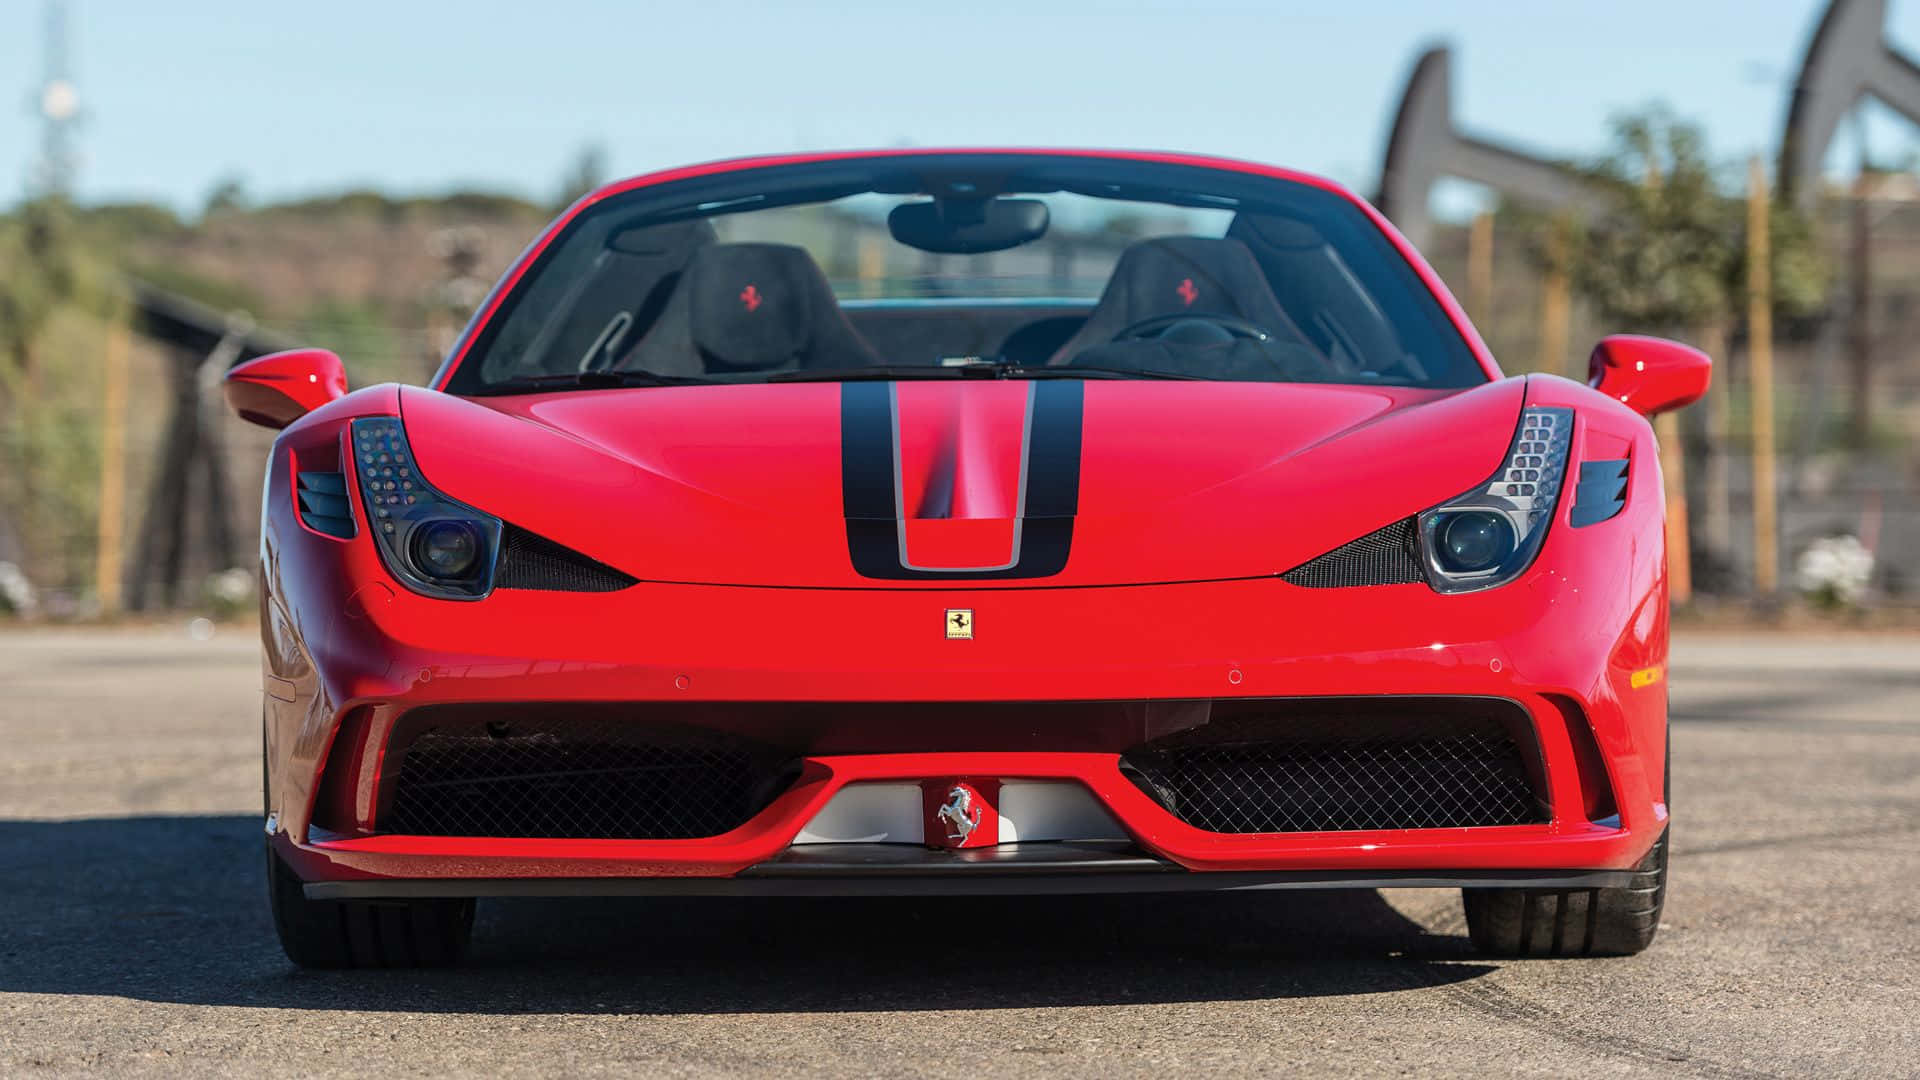 Sleek and Stylish Ferrari 458 Speciale in Action Wallpaper